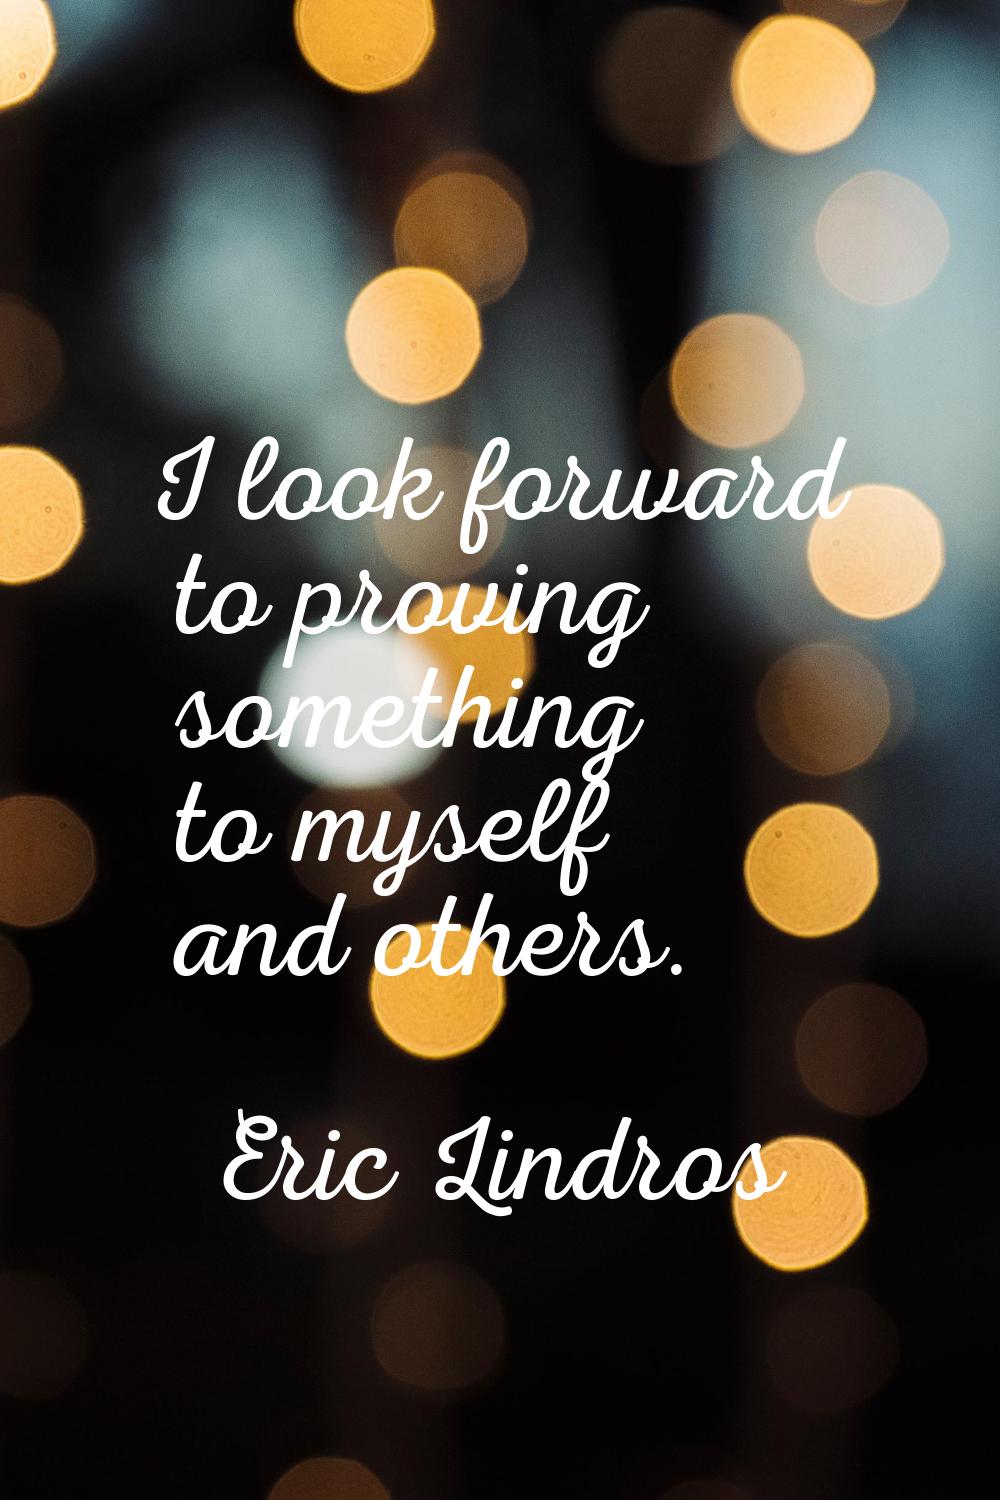 I look forward to proving something to myself and others.